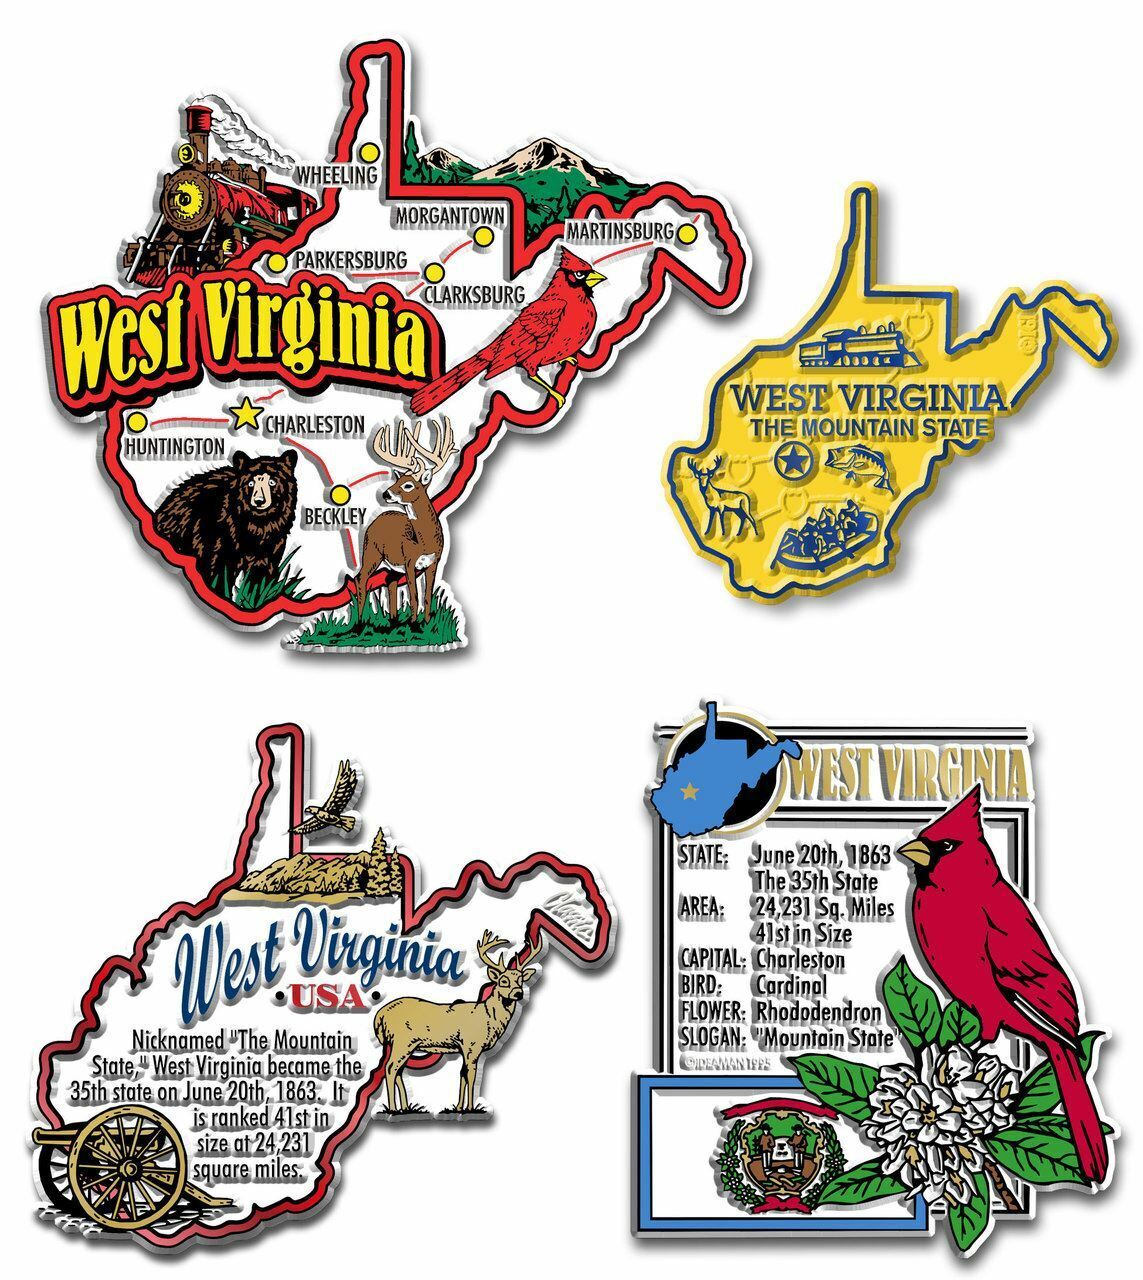 West Virginia Four-Piece State Magnet Set by Classic Magnets, Includes 4 Unique